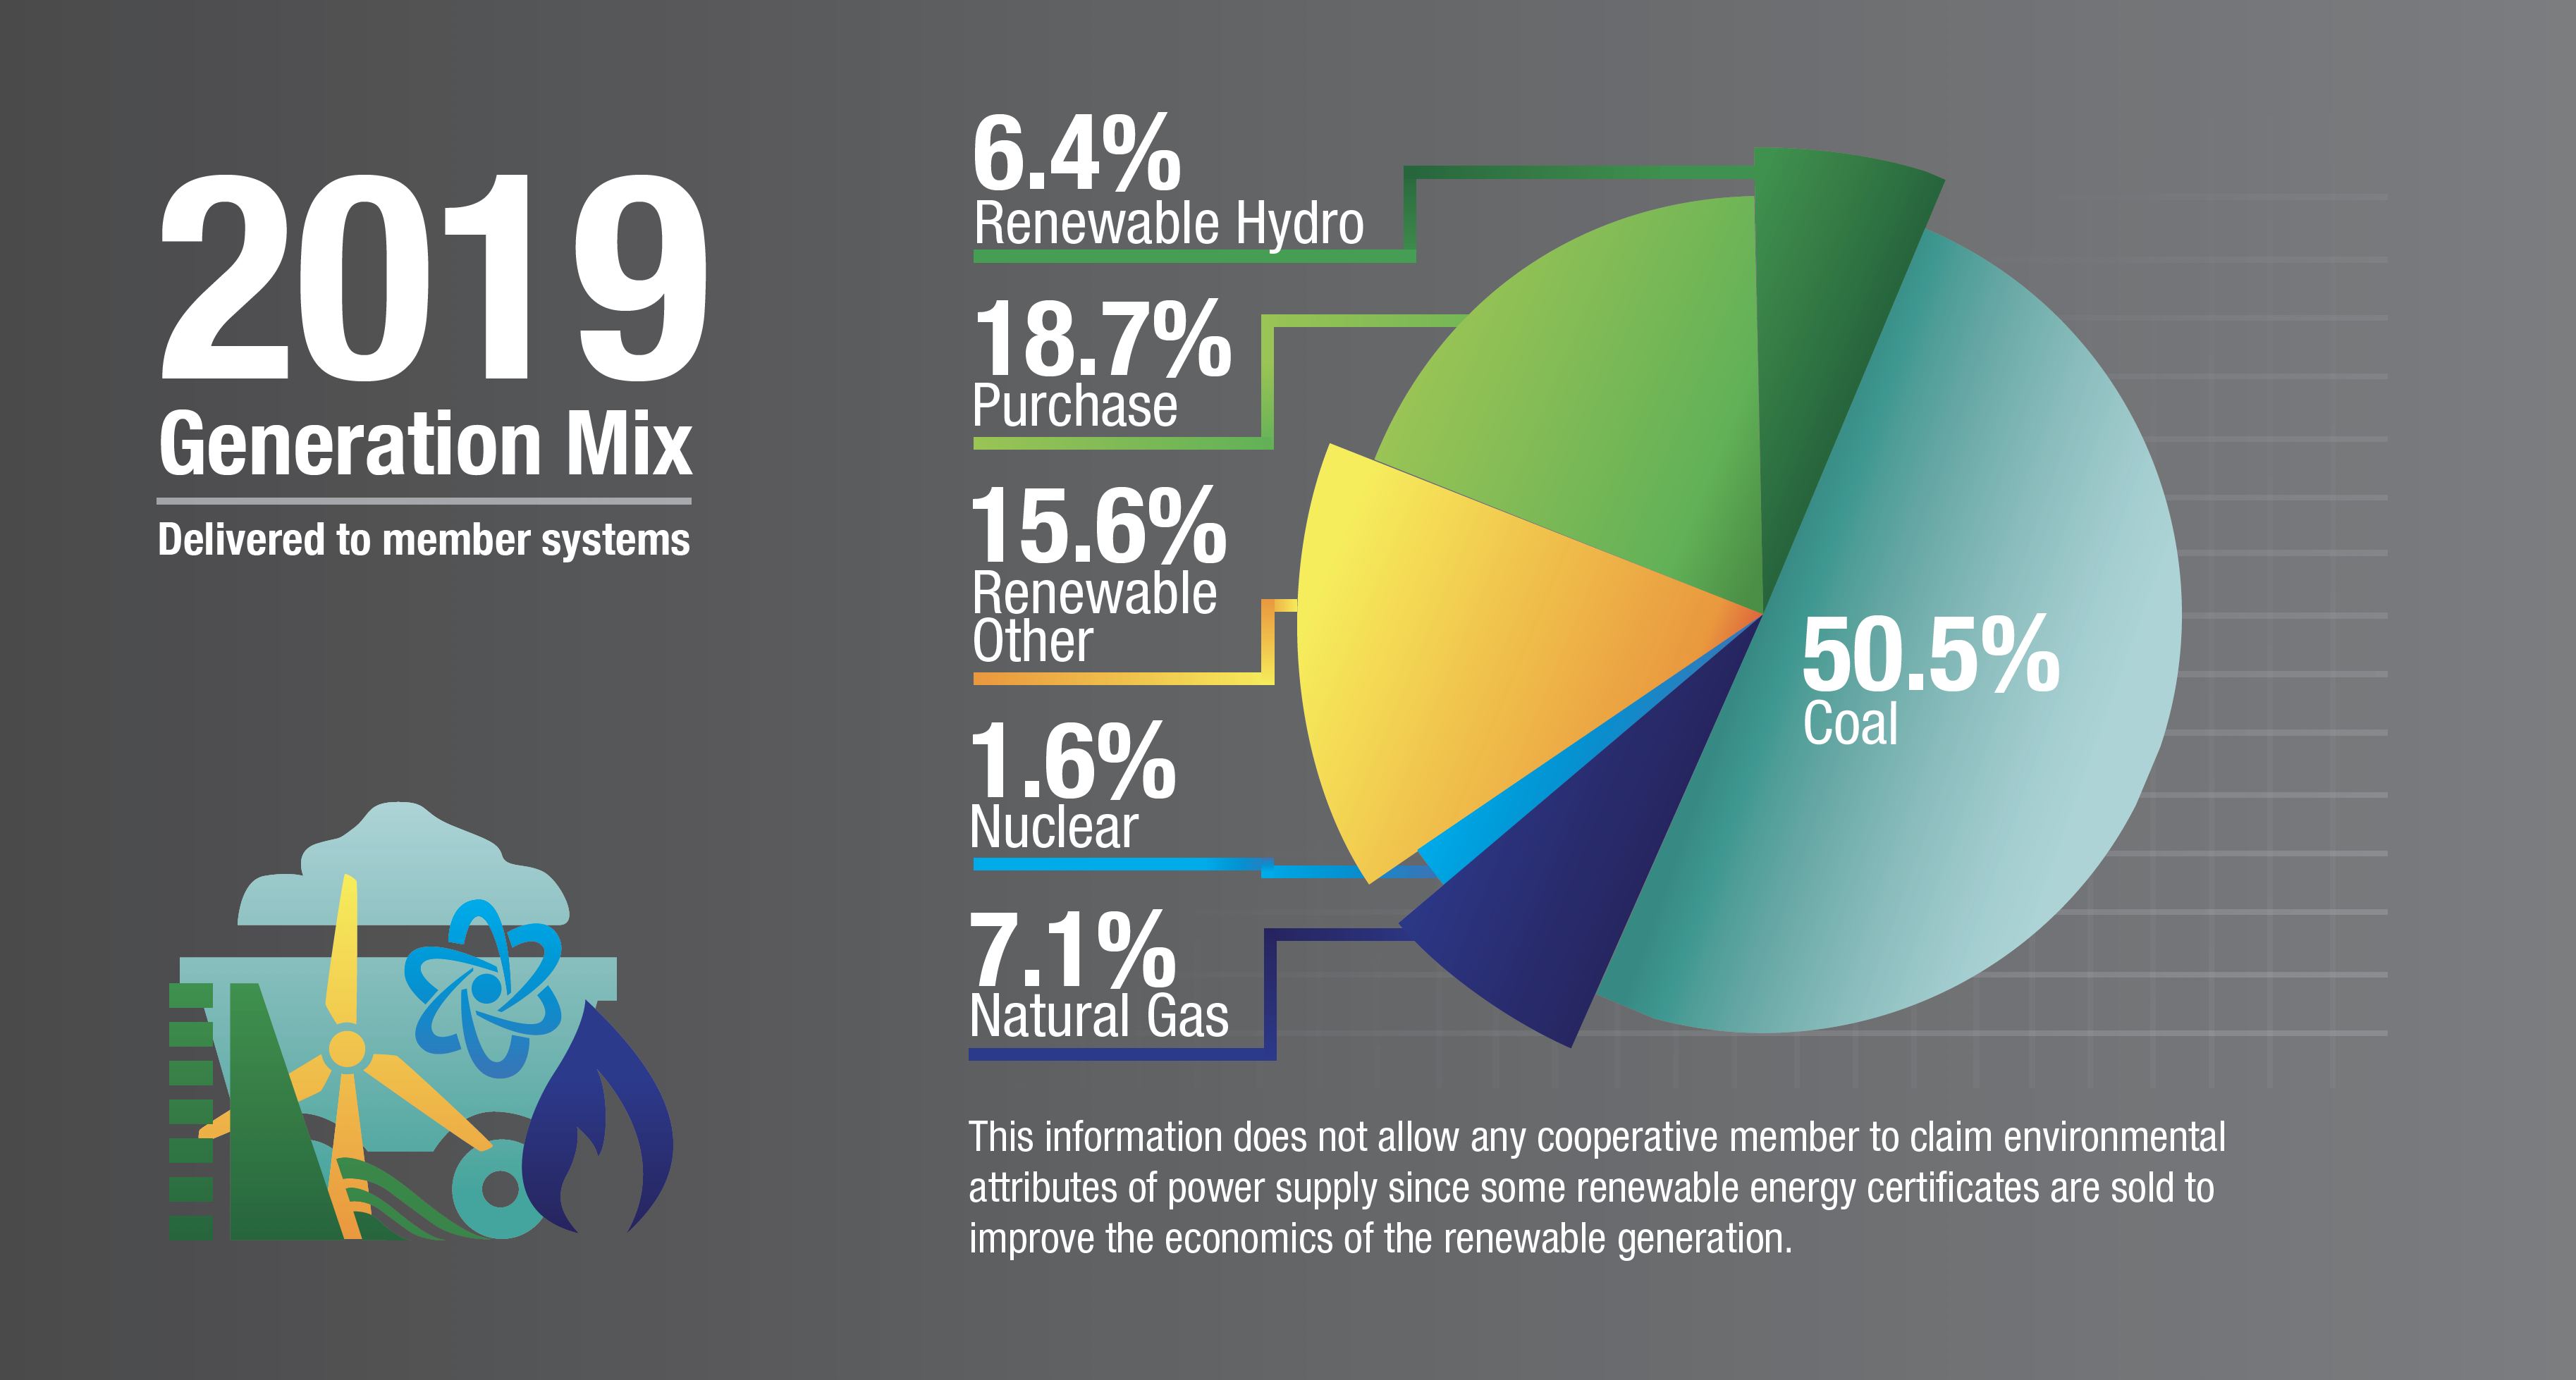 The energy Prairie Energy distributes to our member-owners is mix of coal, natural gas, hydro, fuel oil, wind, and solar energy resources